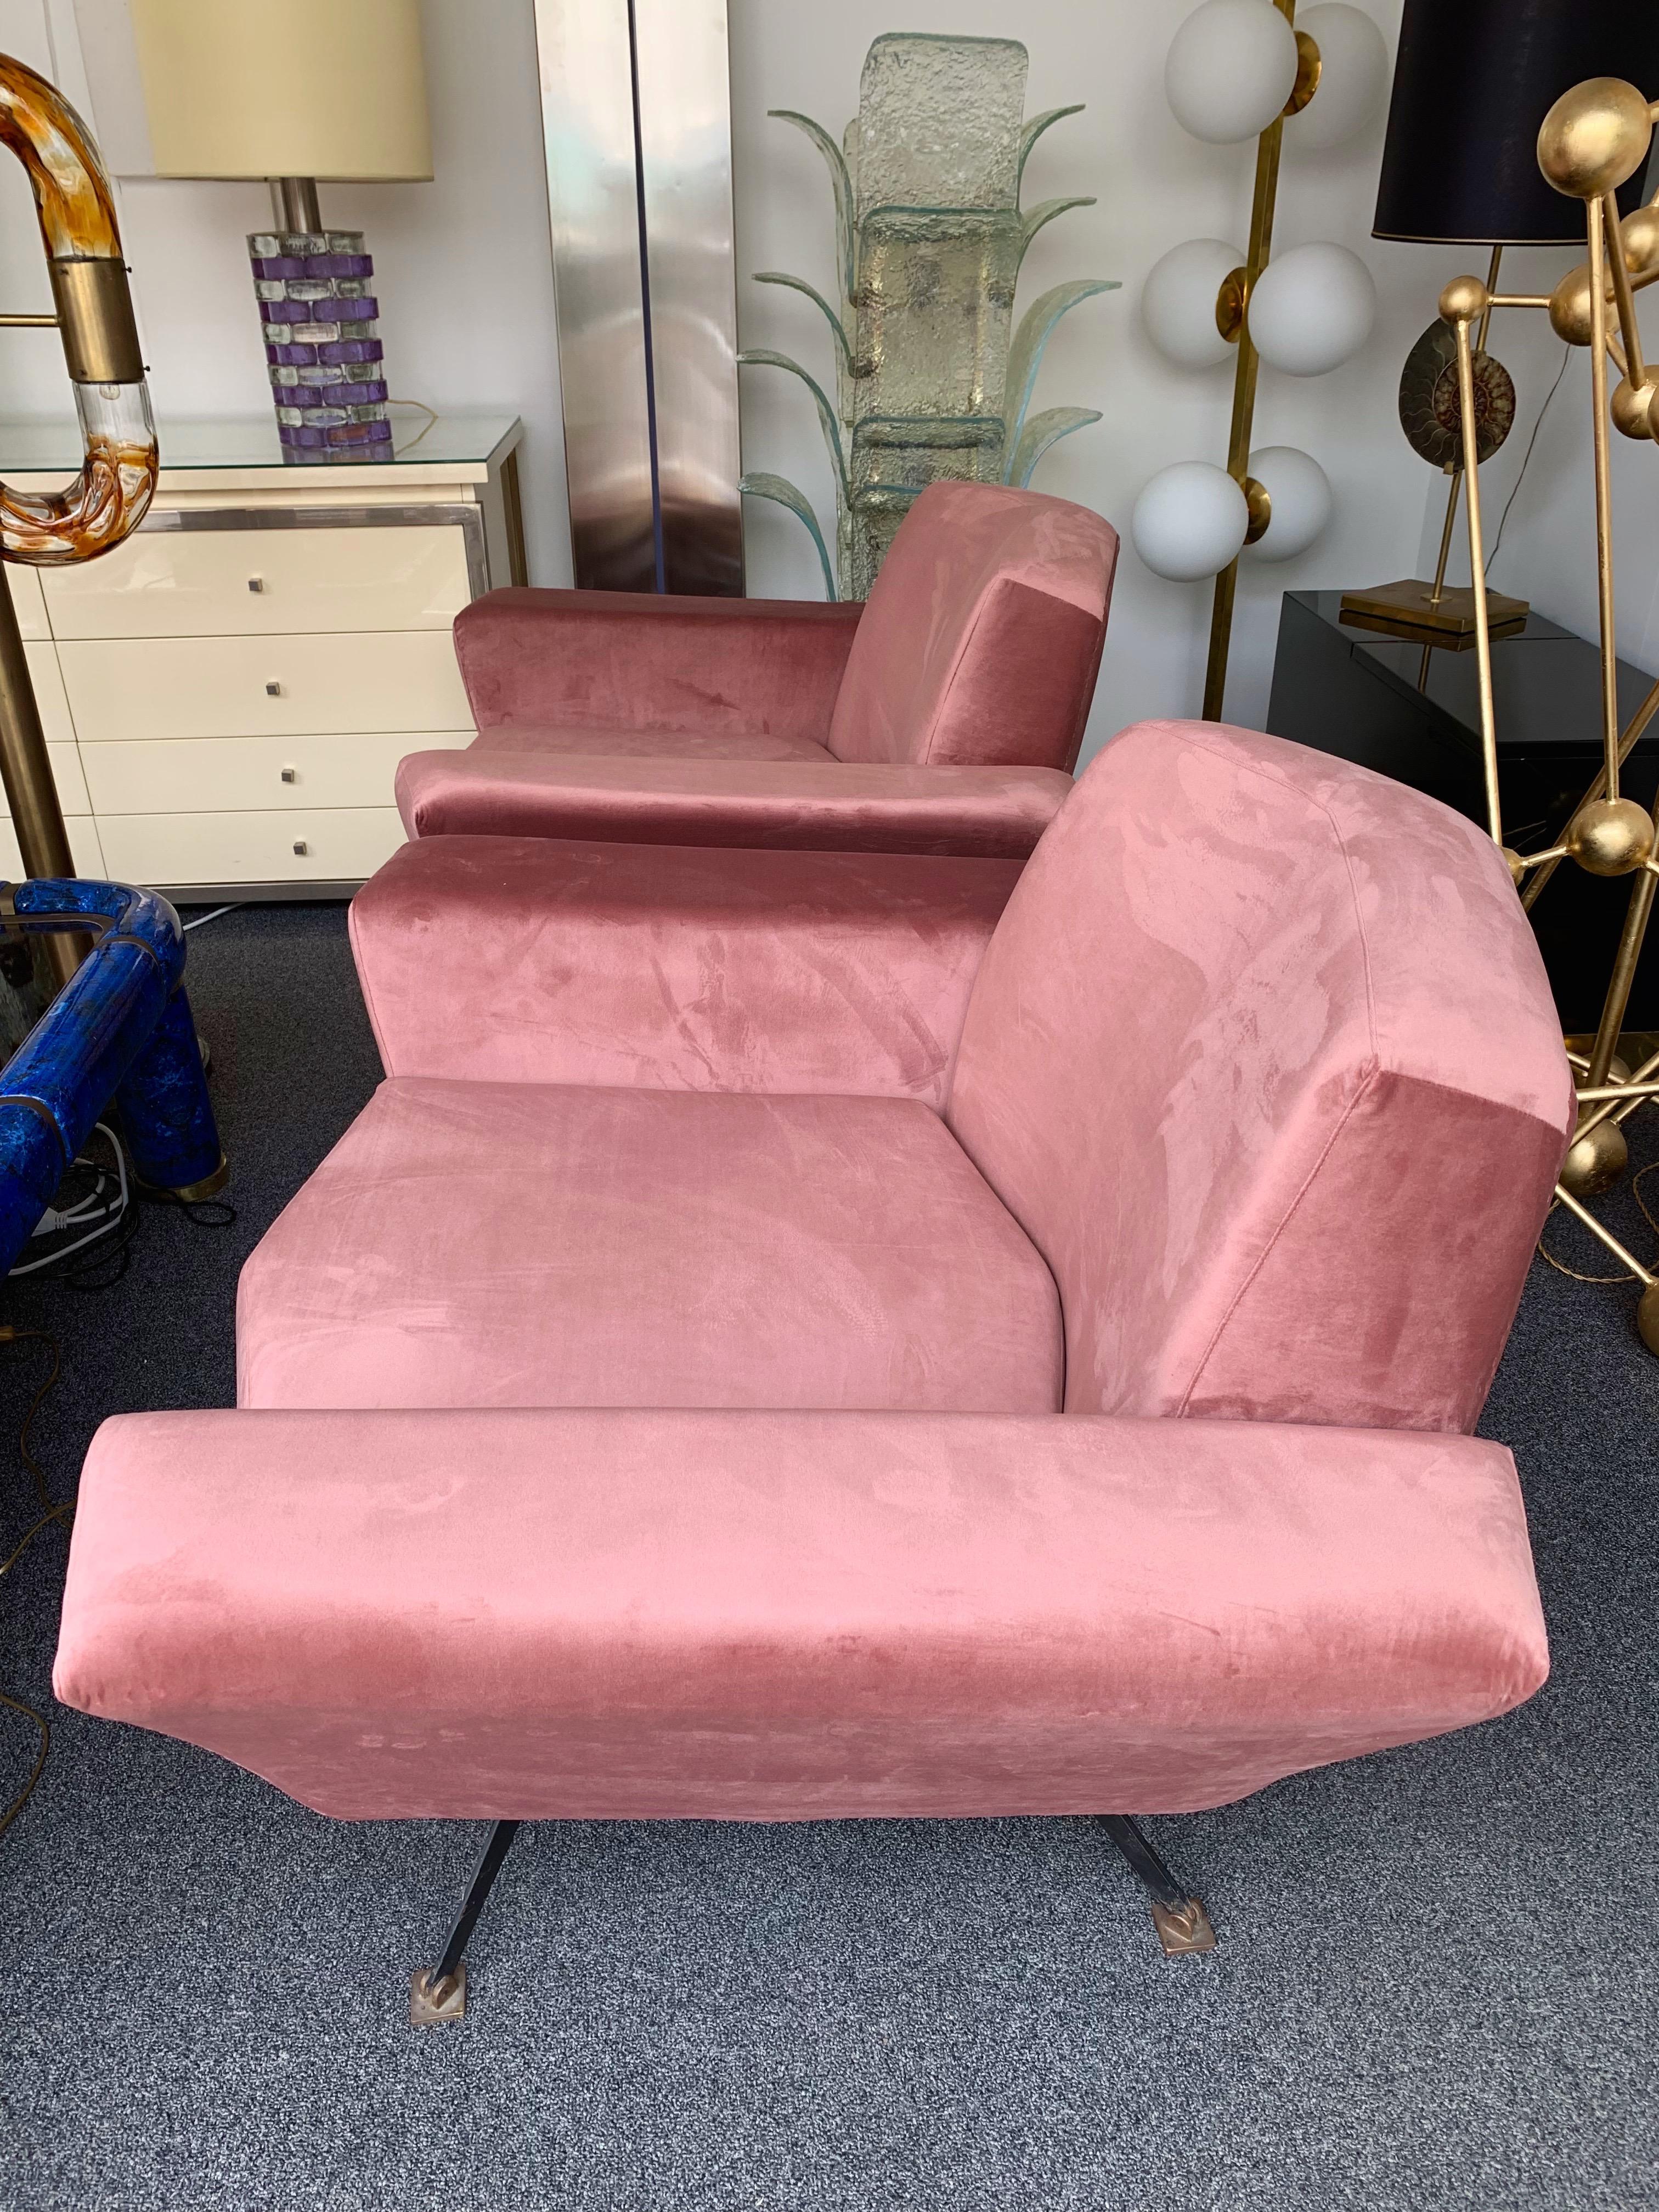 Rare pair of armchairs or lounge chairs model 538 by studio APA for the editor Lenzi. Black metal and brass particular feet. Fully upholstered in a nice old light pink style color velvet fabric. Original documentation available on request. Famous